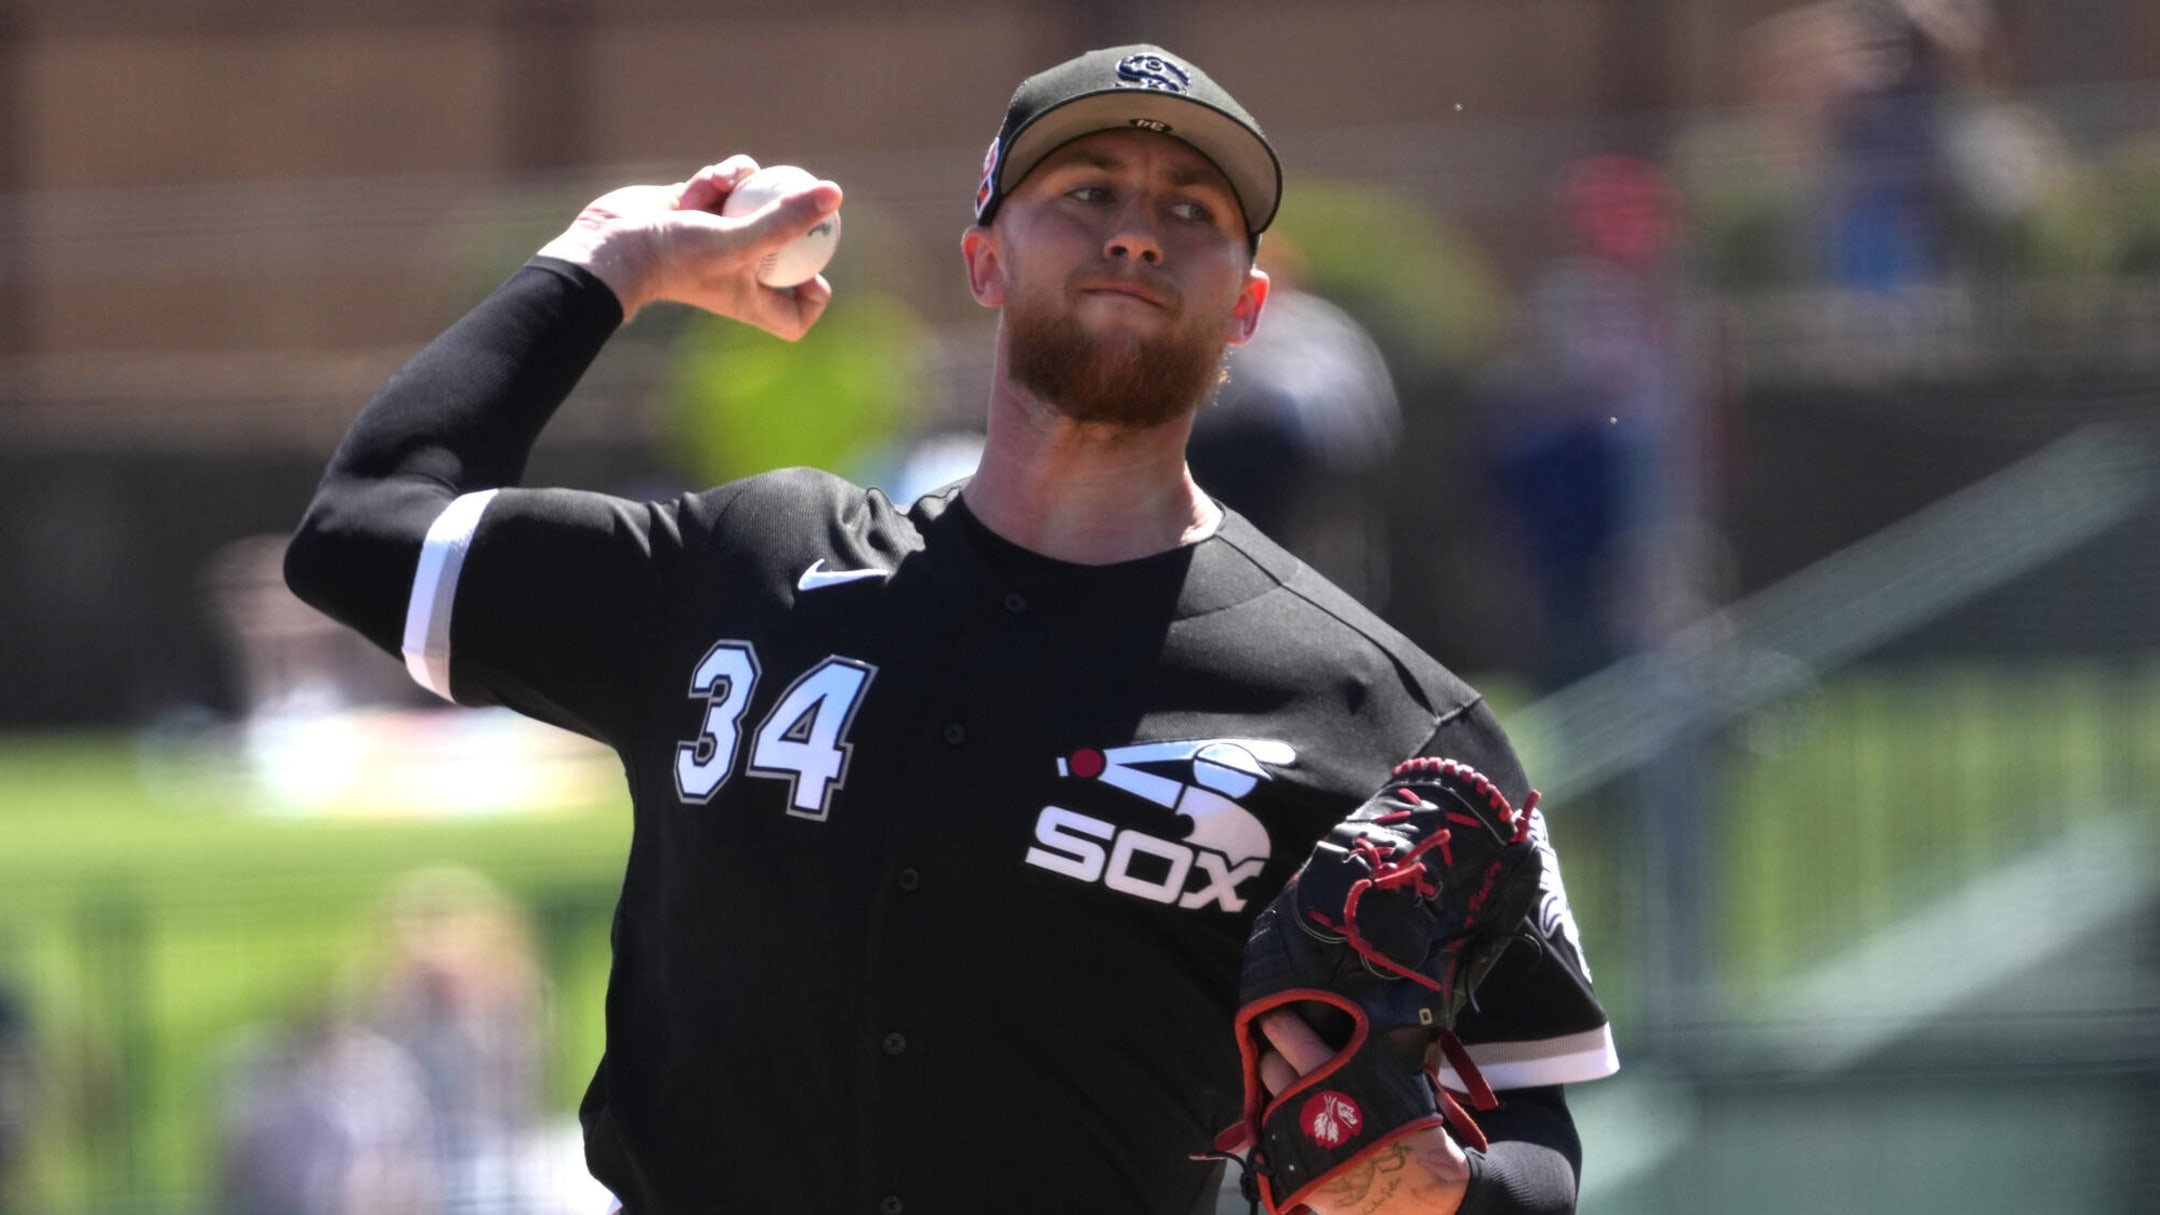 White Sox to sport new uniforms for spring training 2016